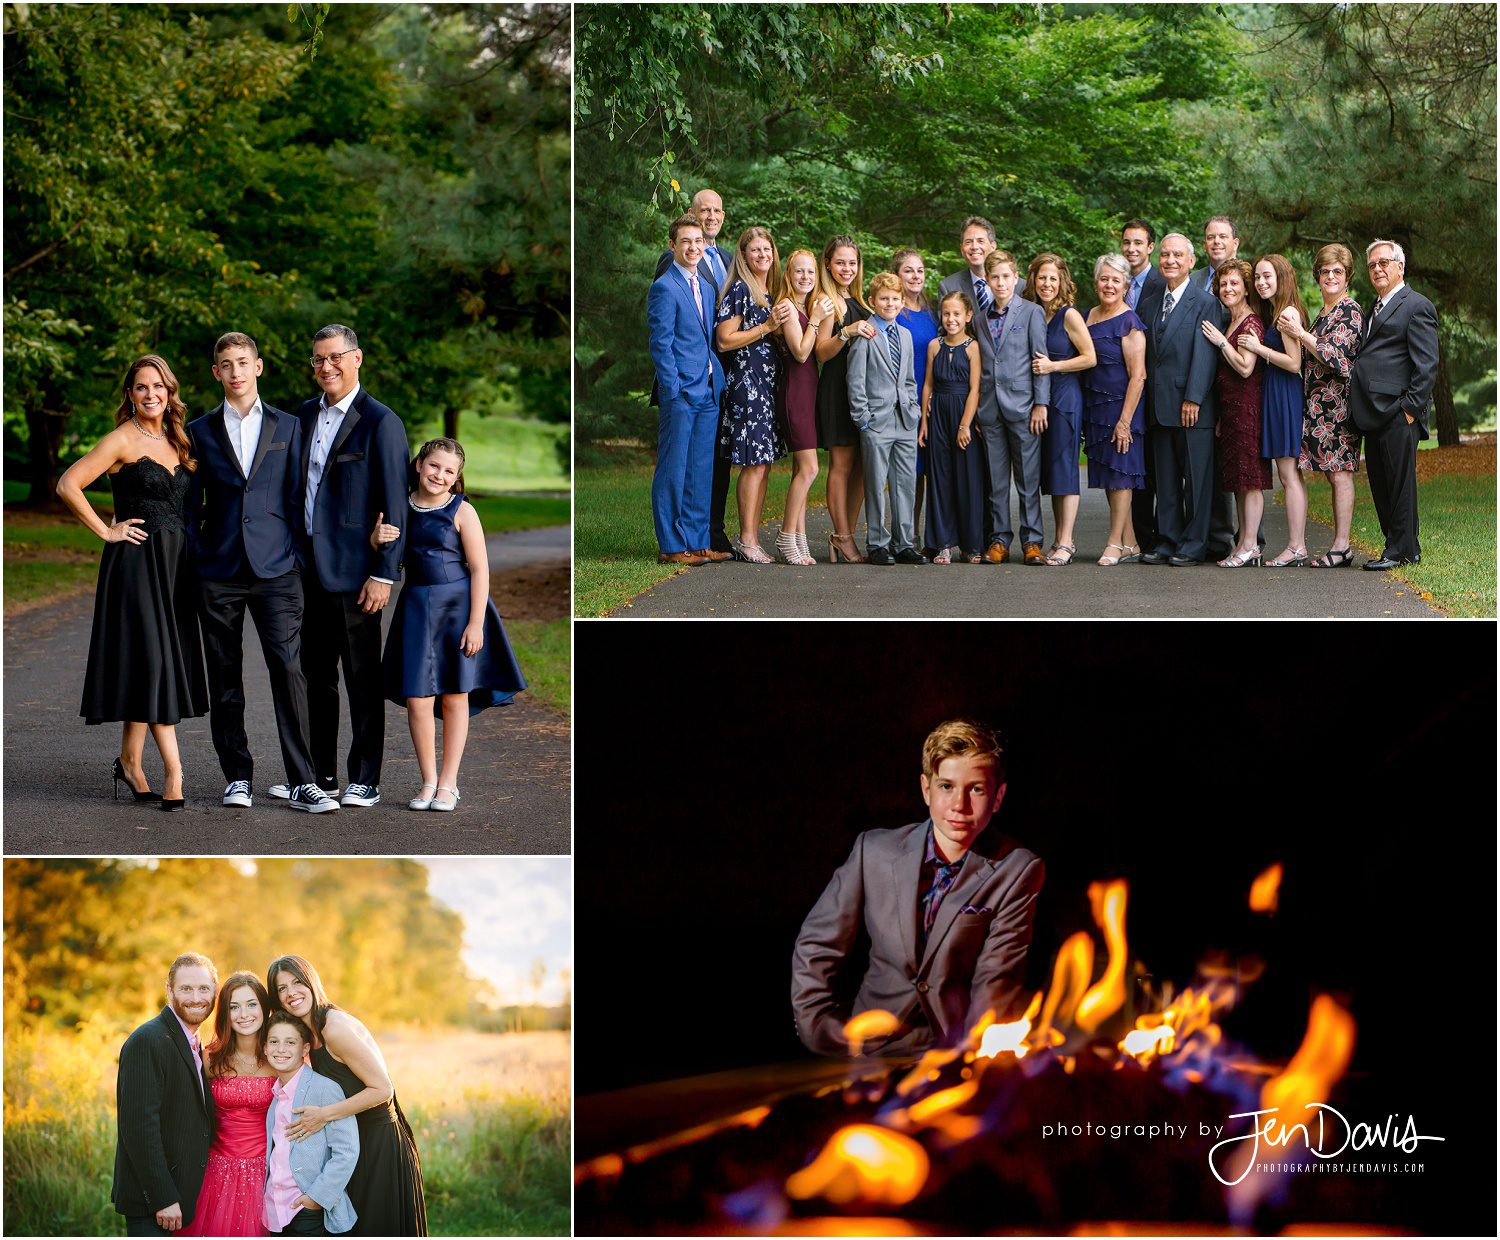 Outdoor Portraits for Family Formals during a Bar Bat Mitzvah